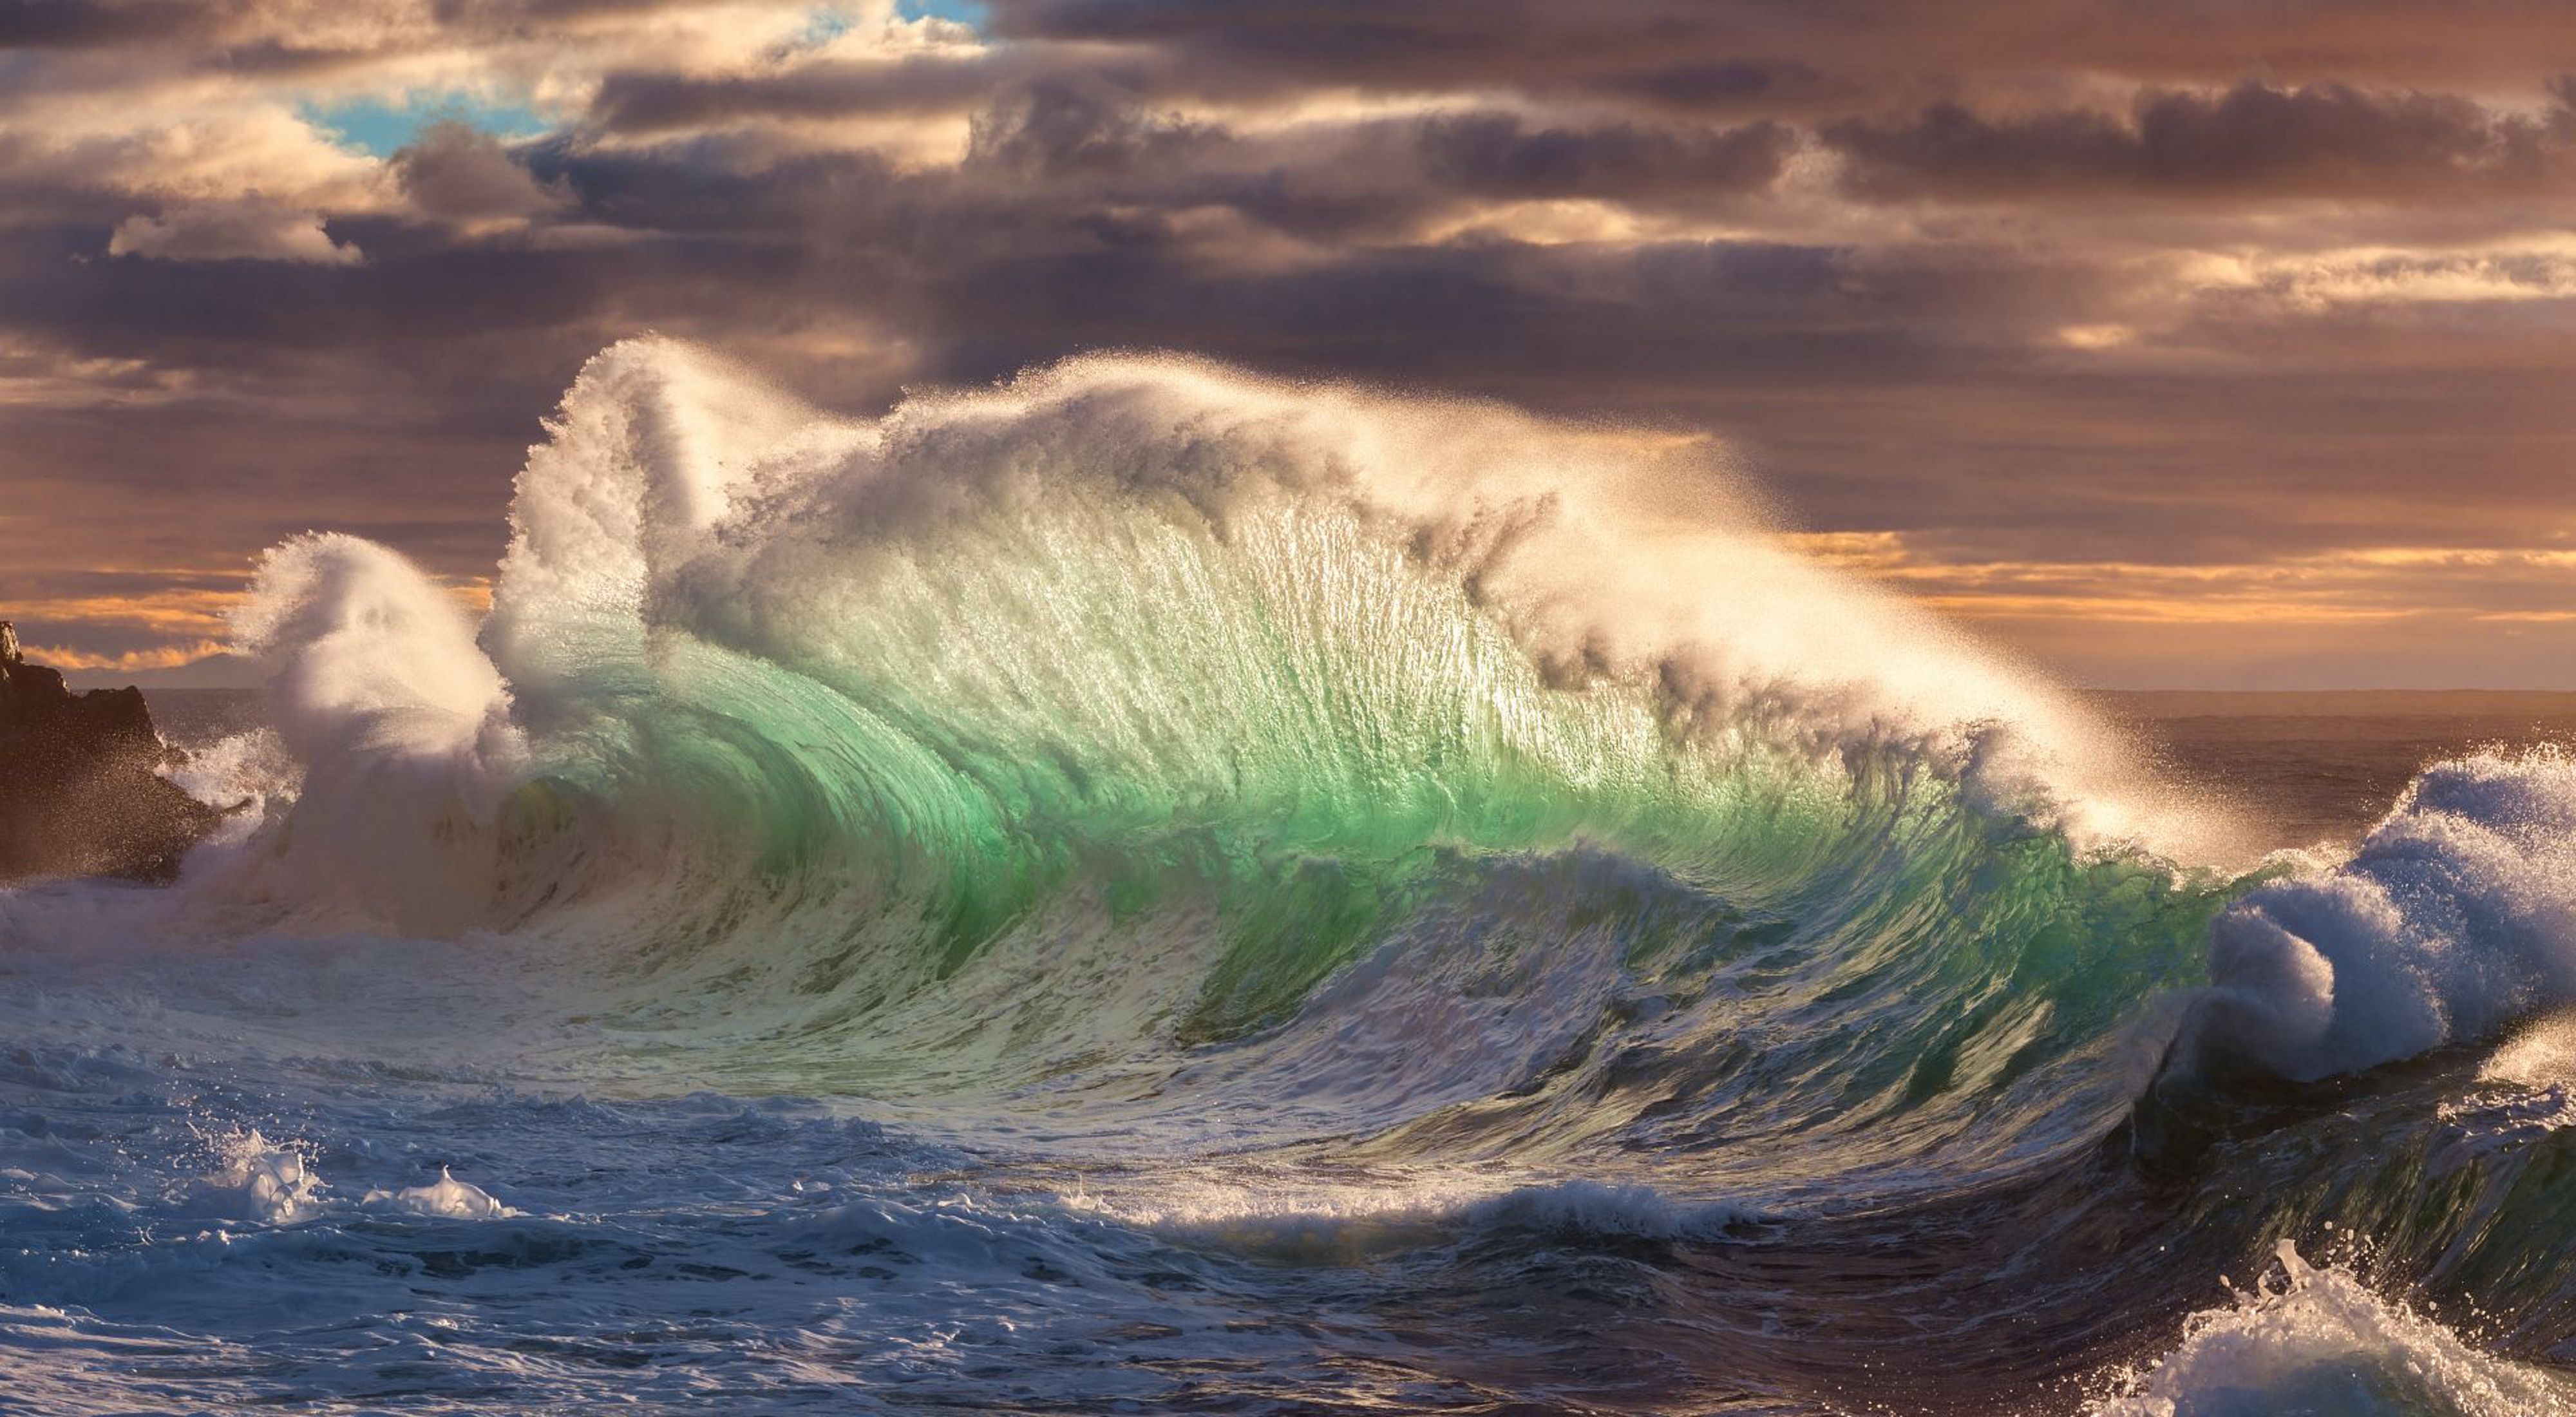 A wave breaks as the ocean swells towards the shore.